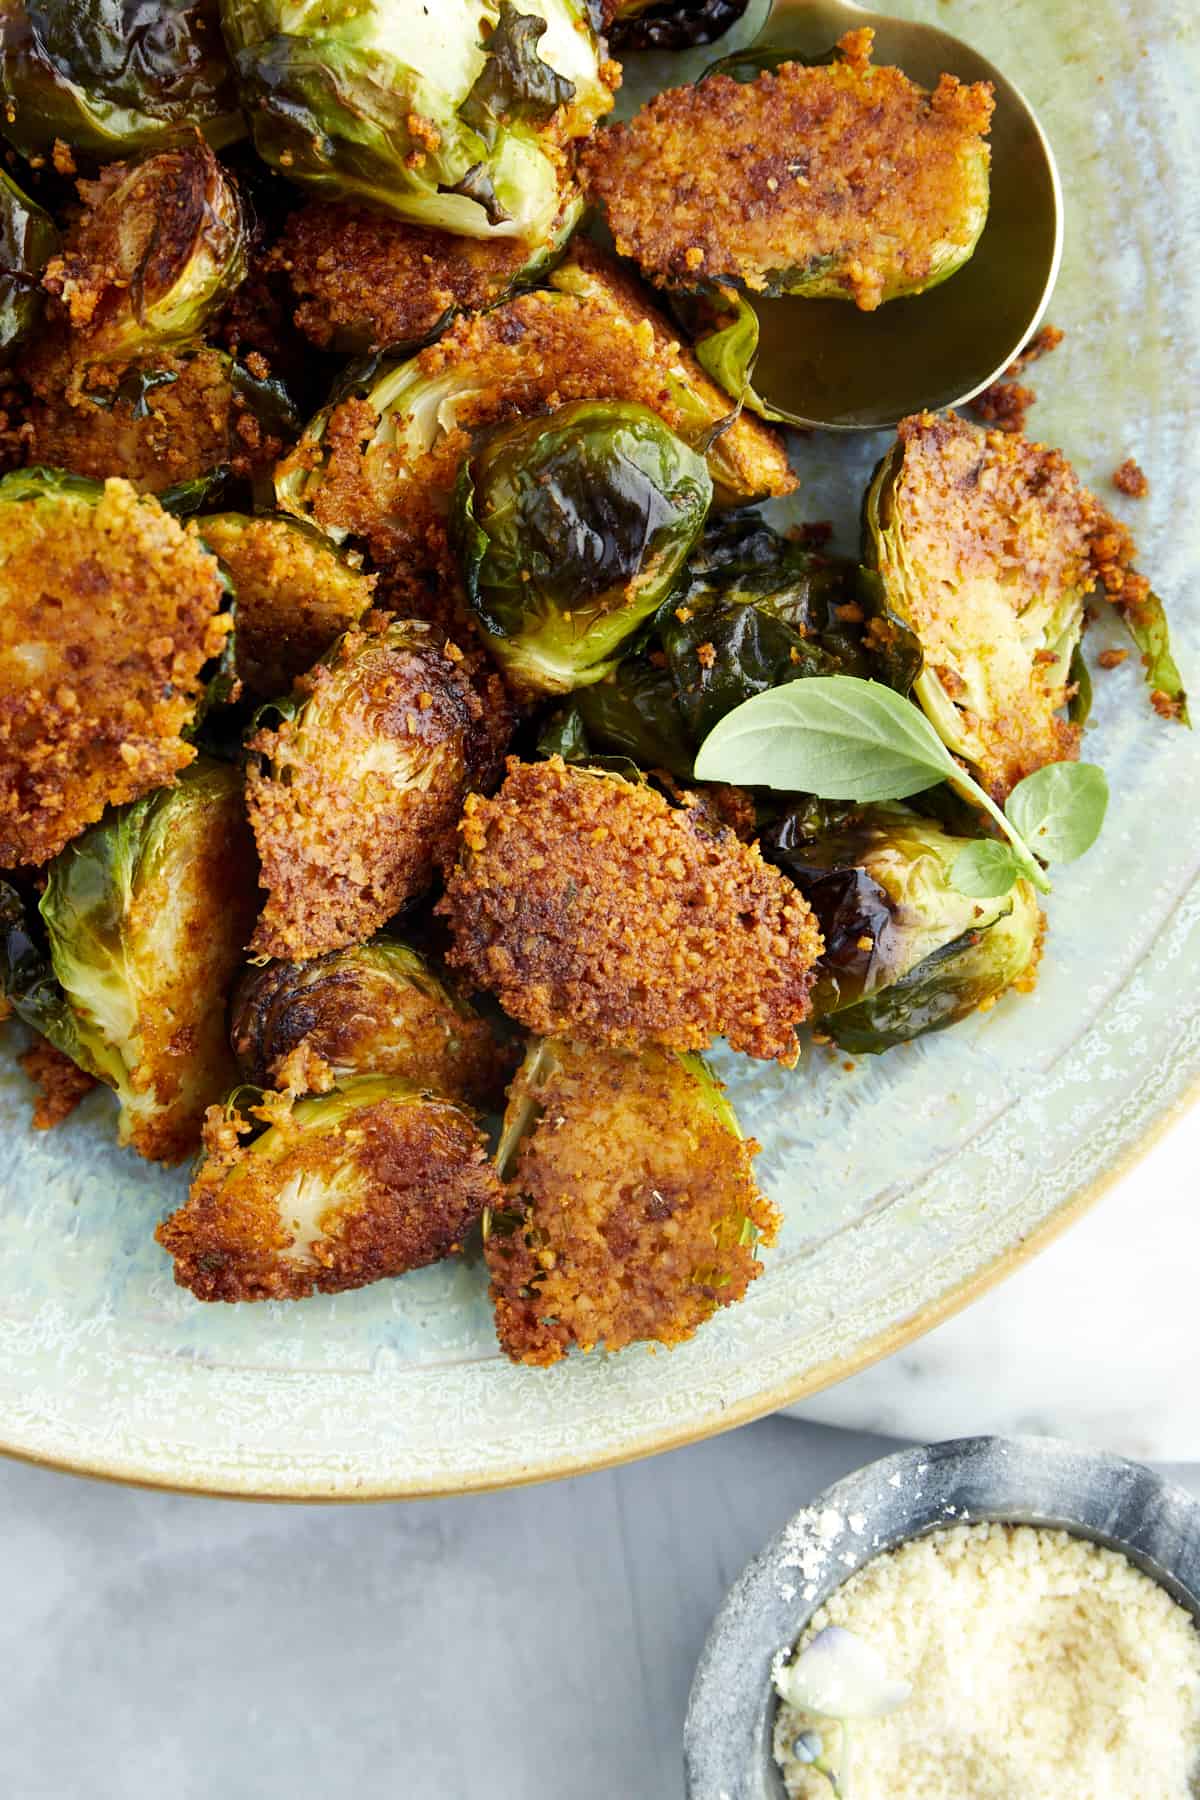 A plate of Parmesan brussel sprouts.